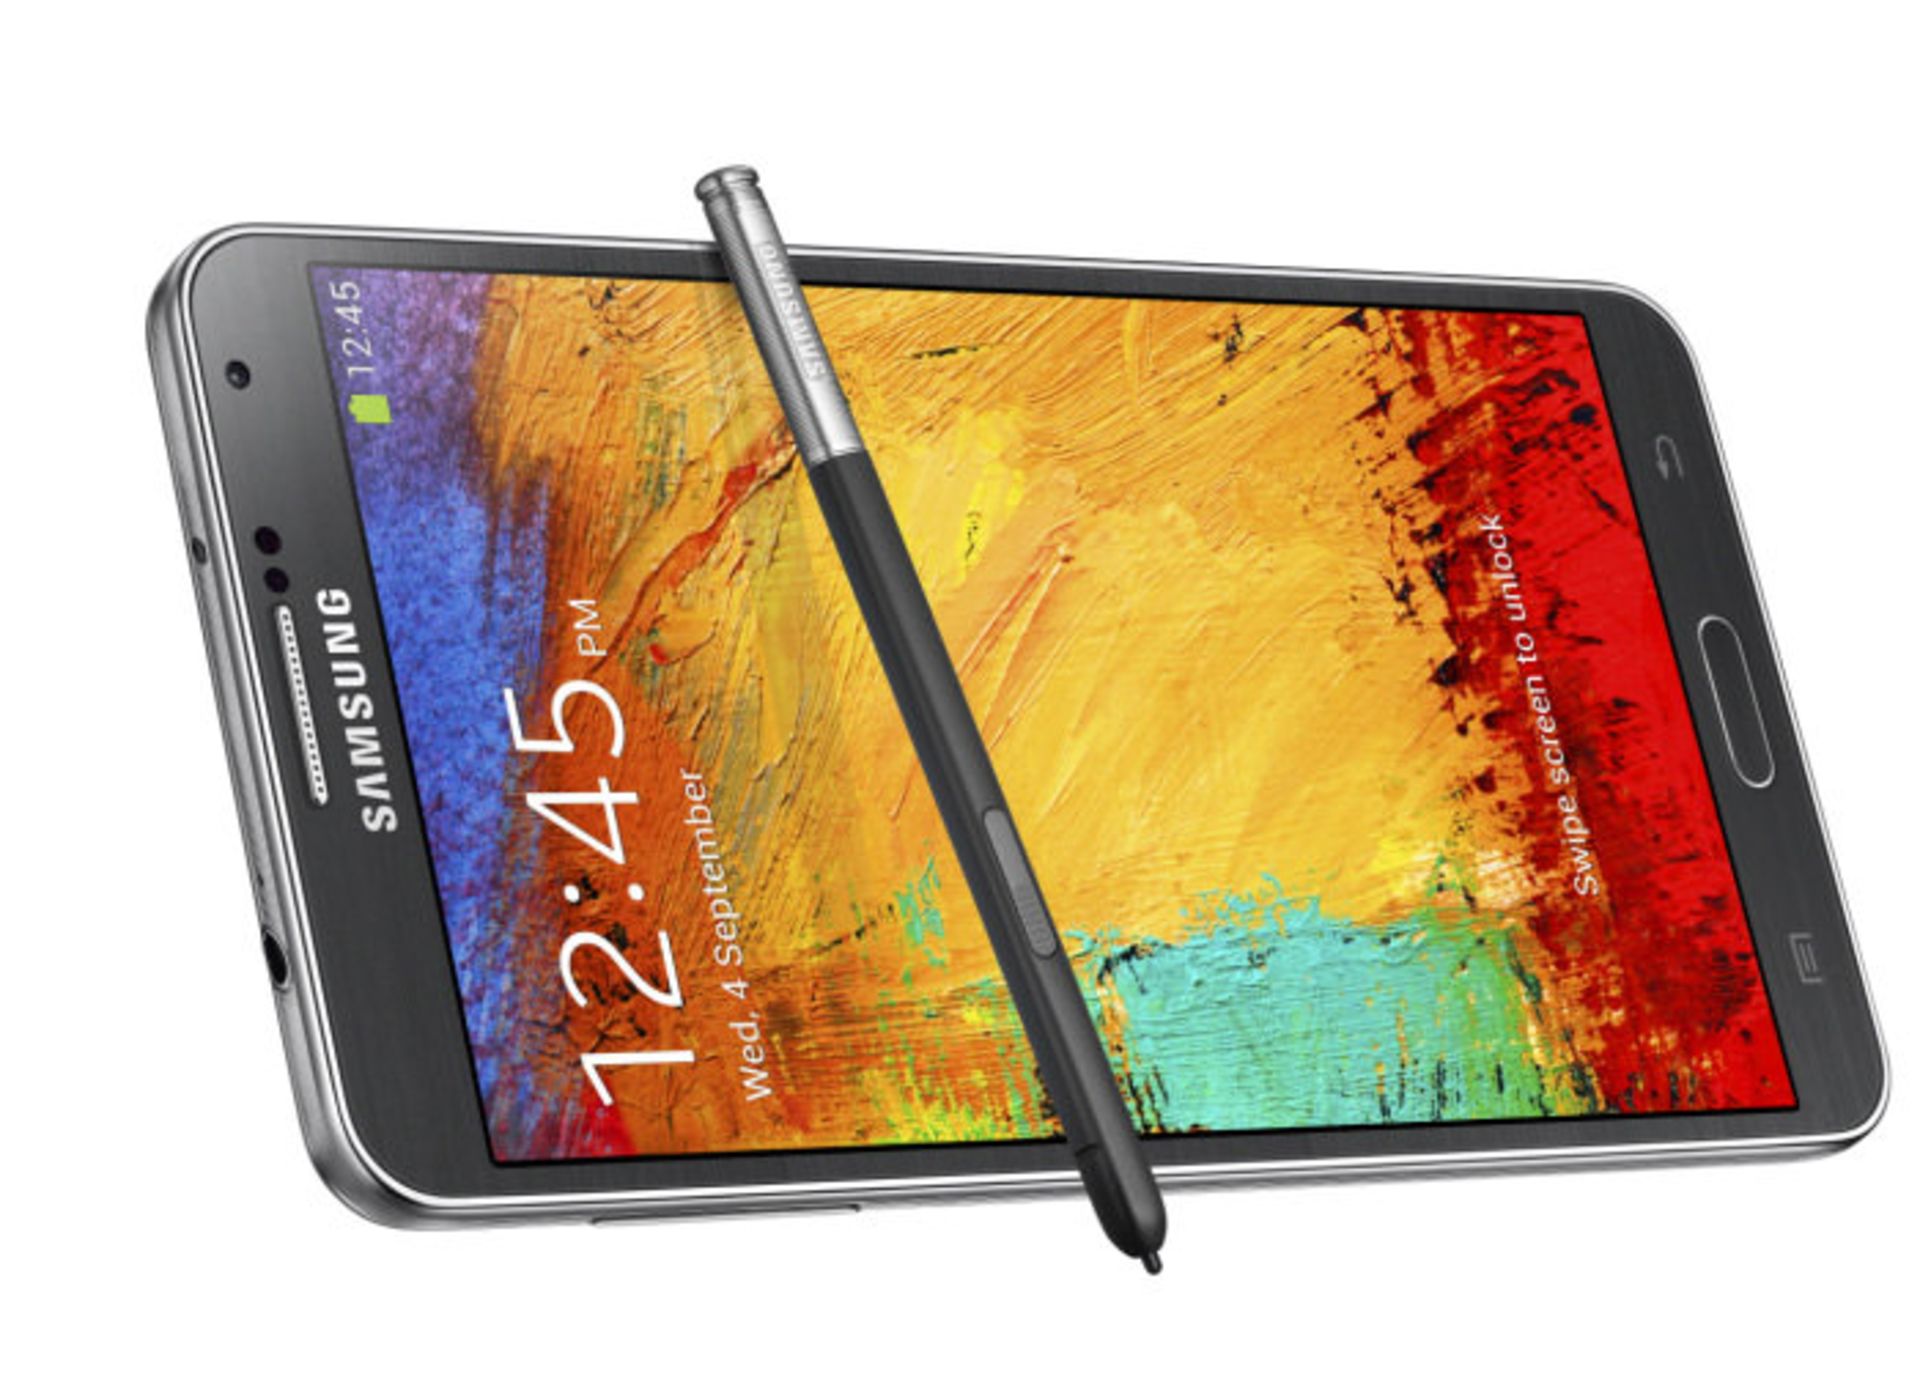 galxy-note3 025 front-dynamic-with-pen2 jet-black